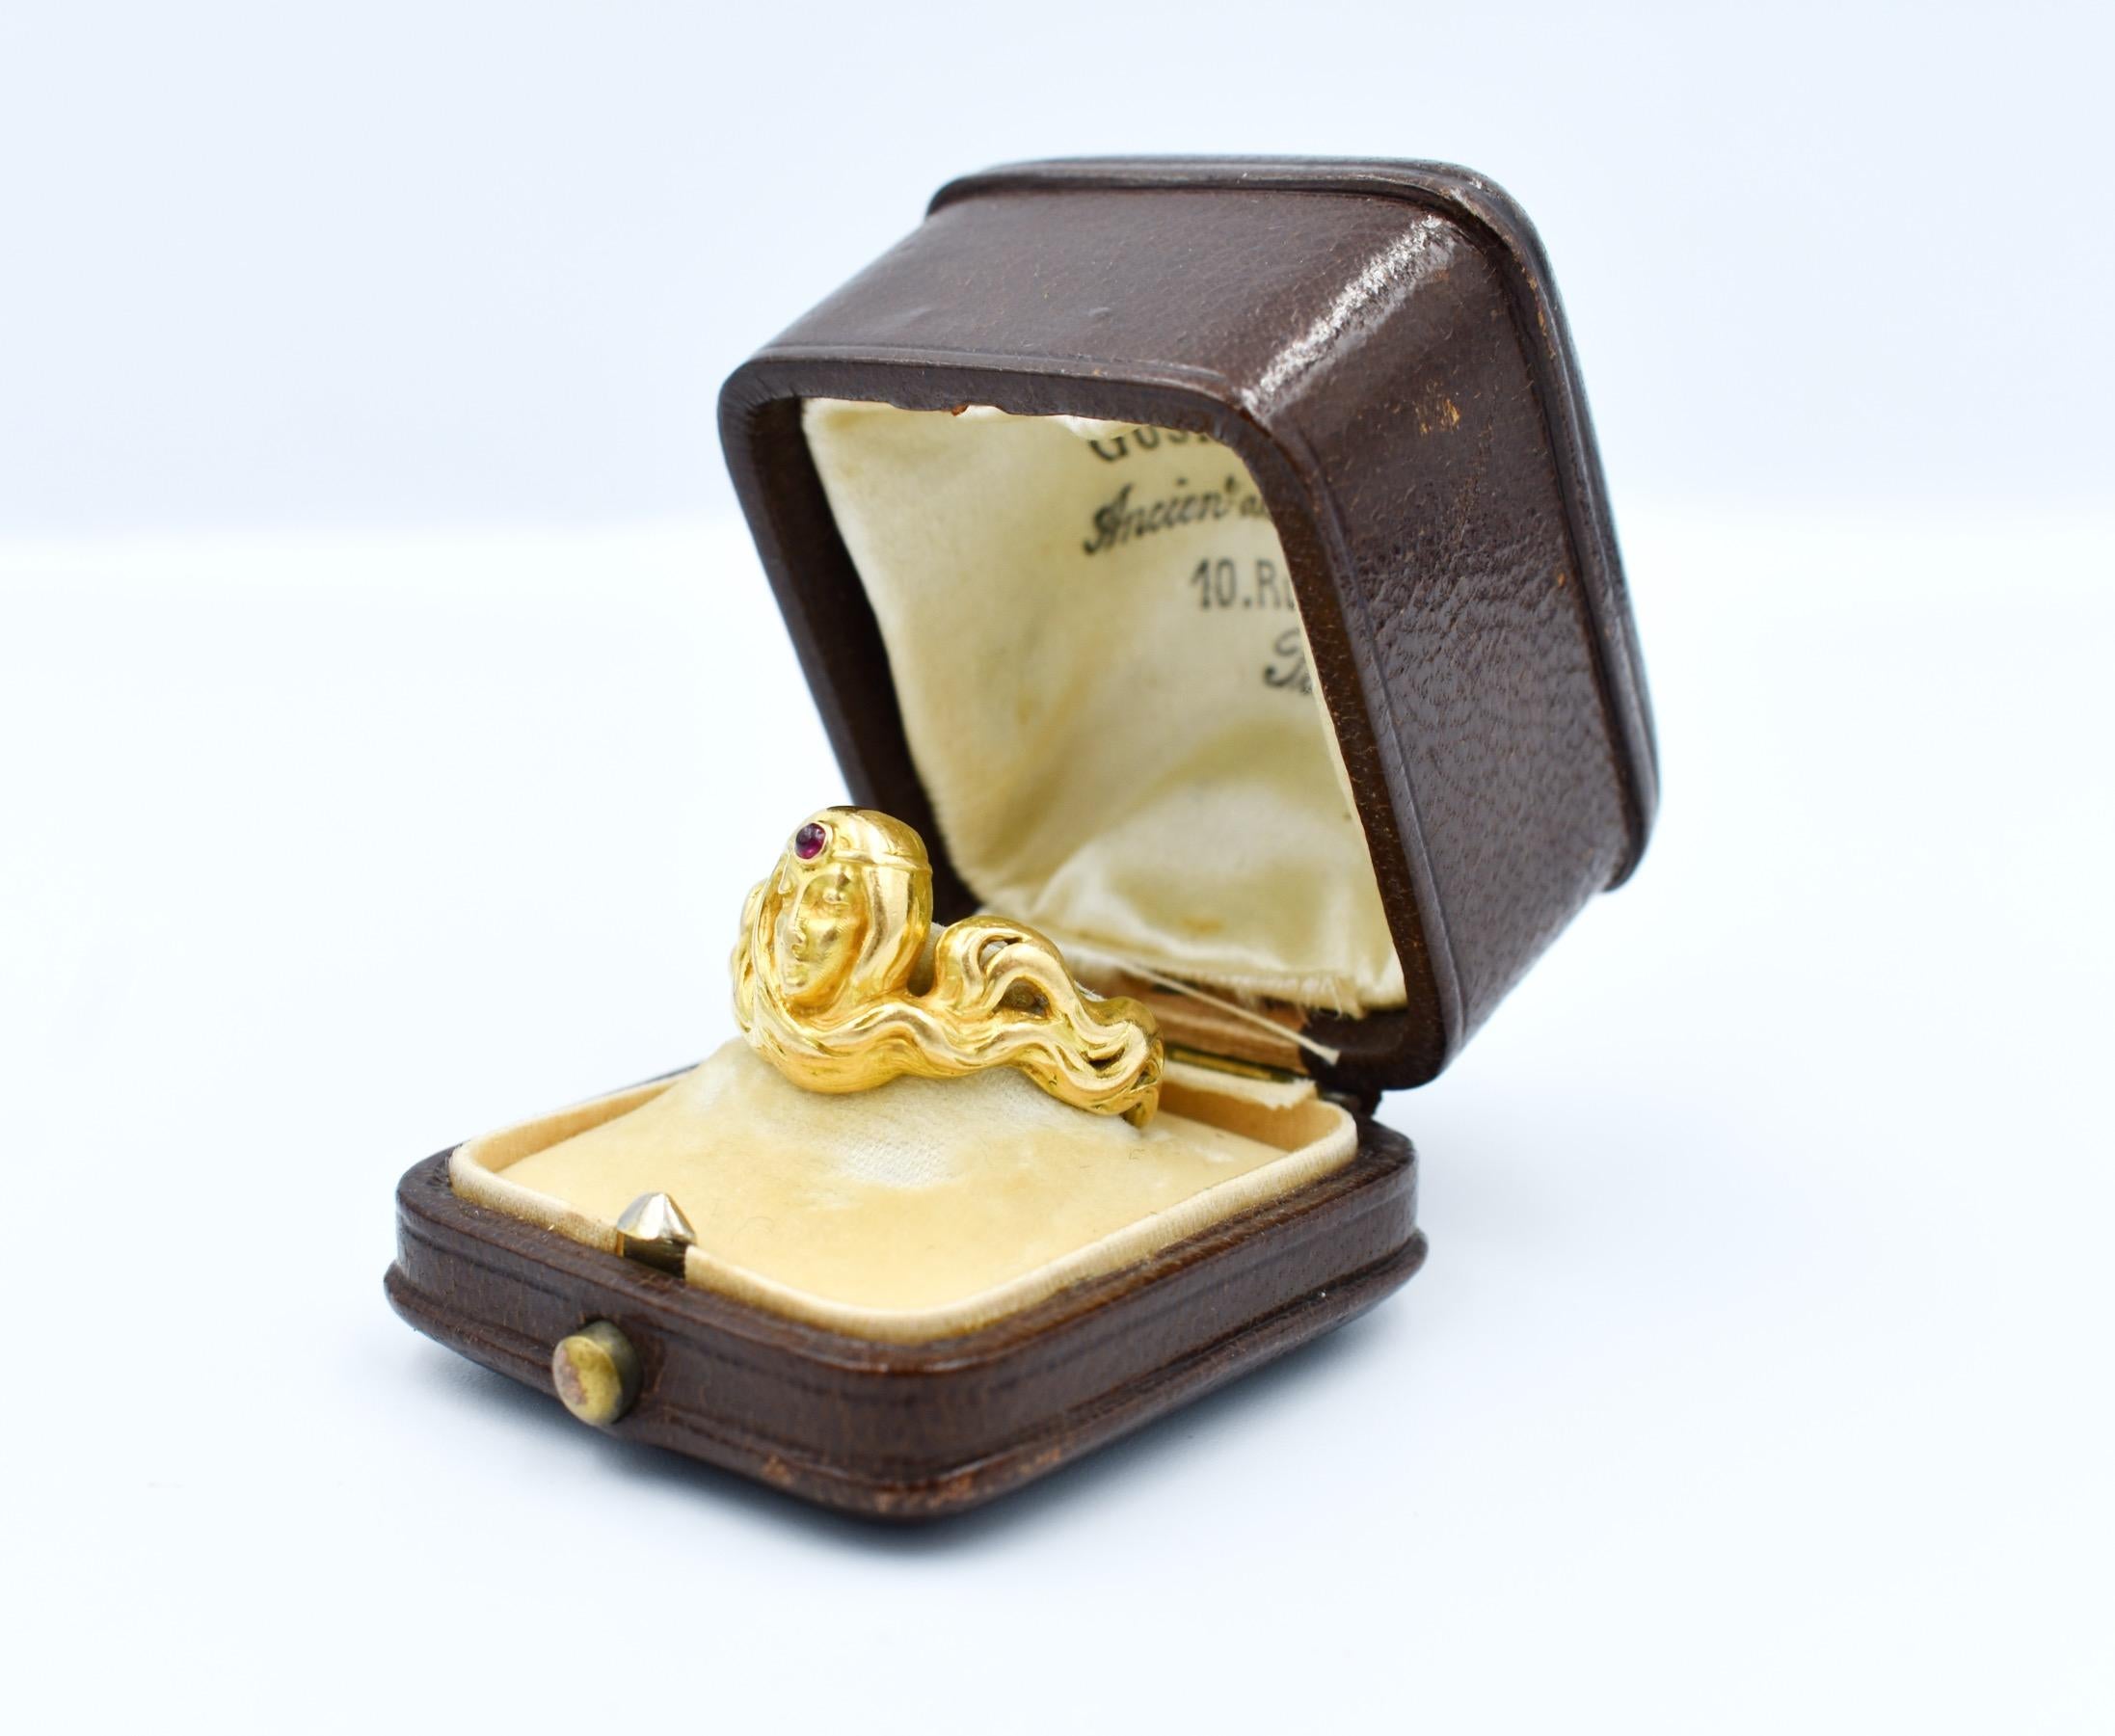 This remarkable Art Nouveau ring, in 18-carat gold, is a unique piece that embodies the elegance and creativity characteristic of this early 20th century artistic period. It features an extraordinary design depicting the face of a graceful woman